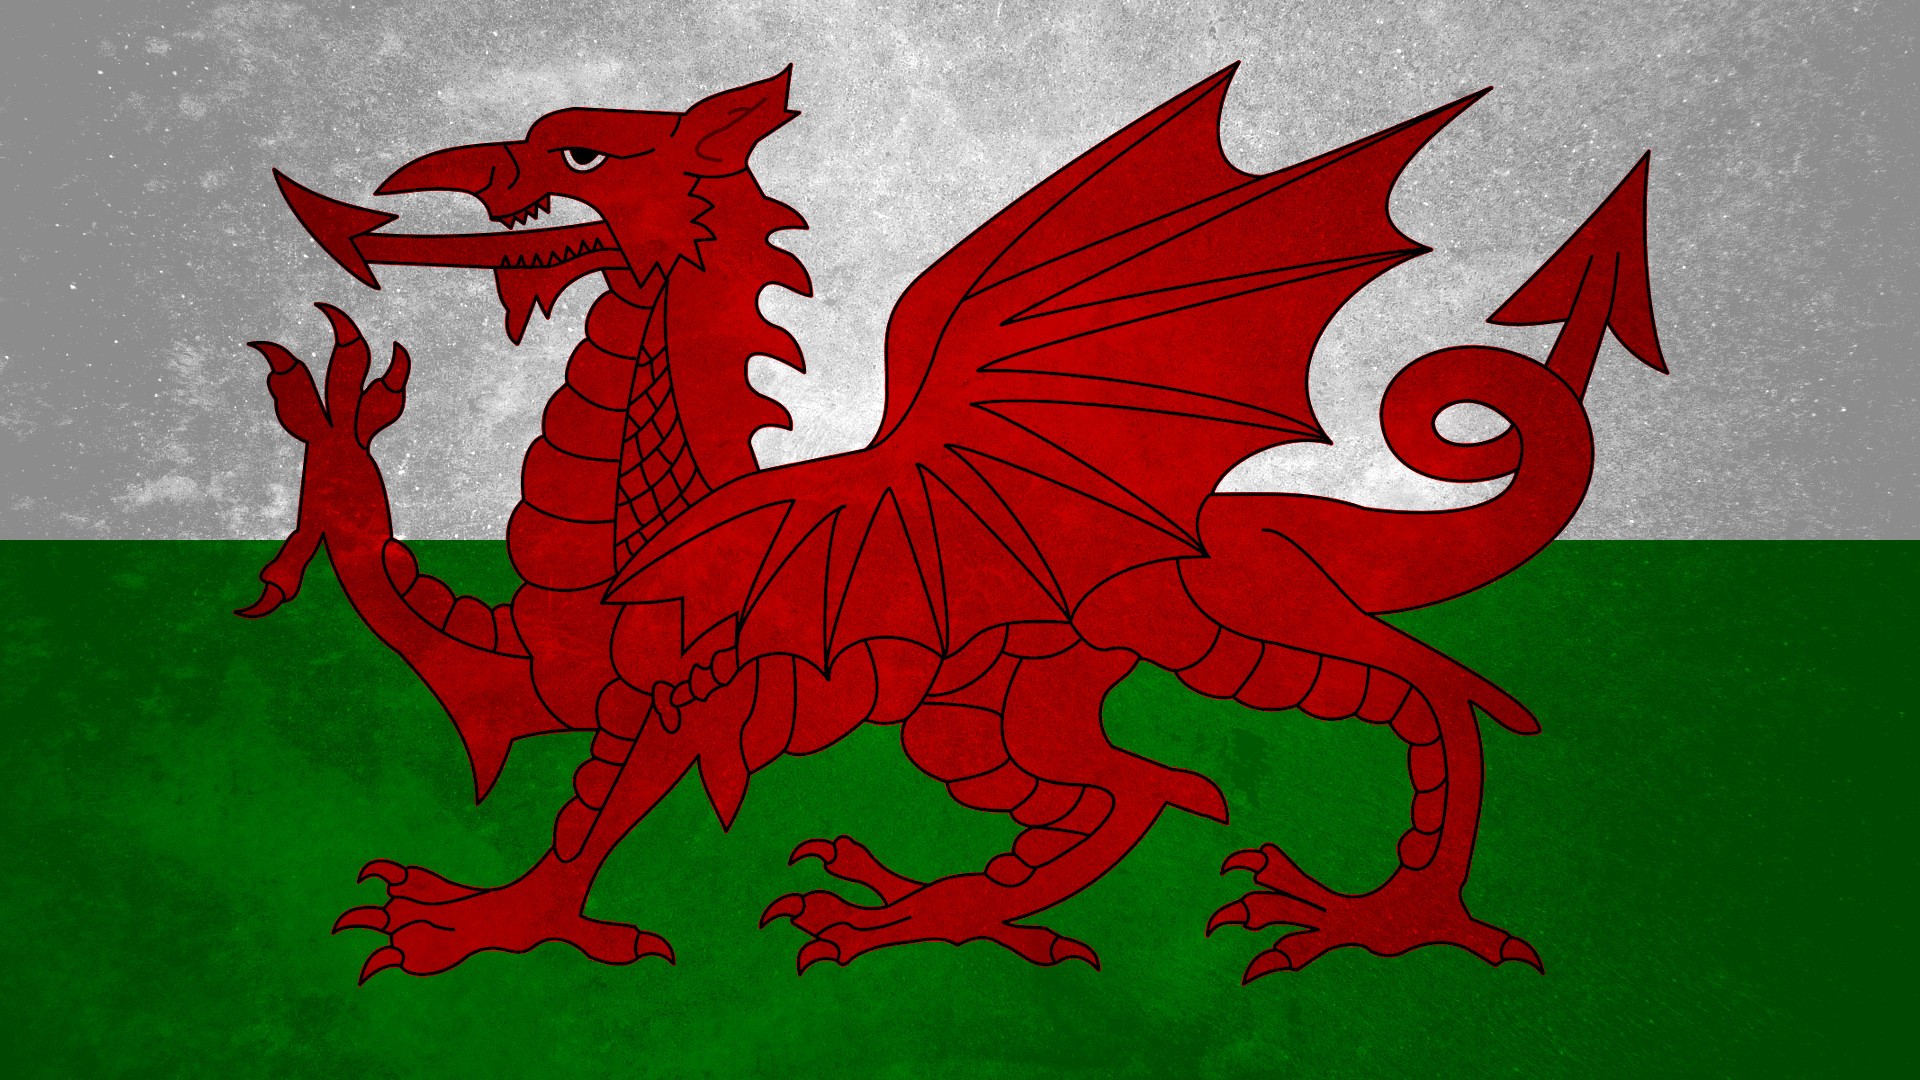 General 1920x1080 Wales green white red flag dragon